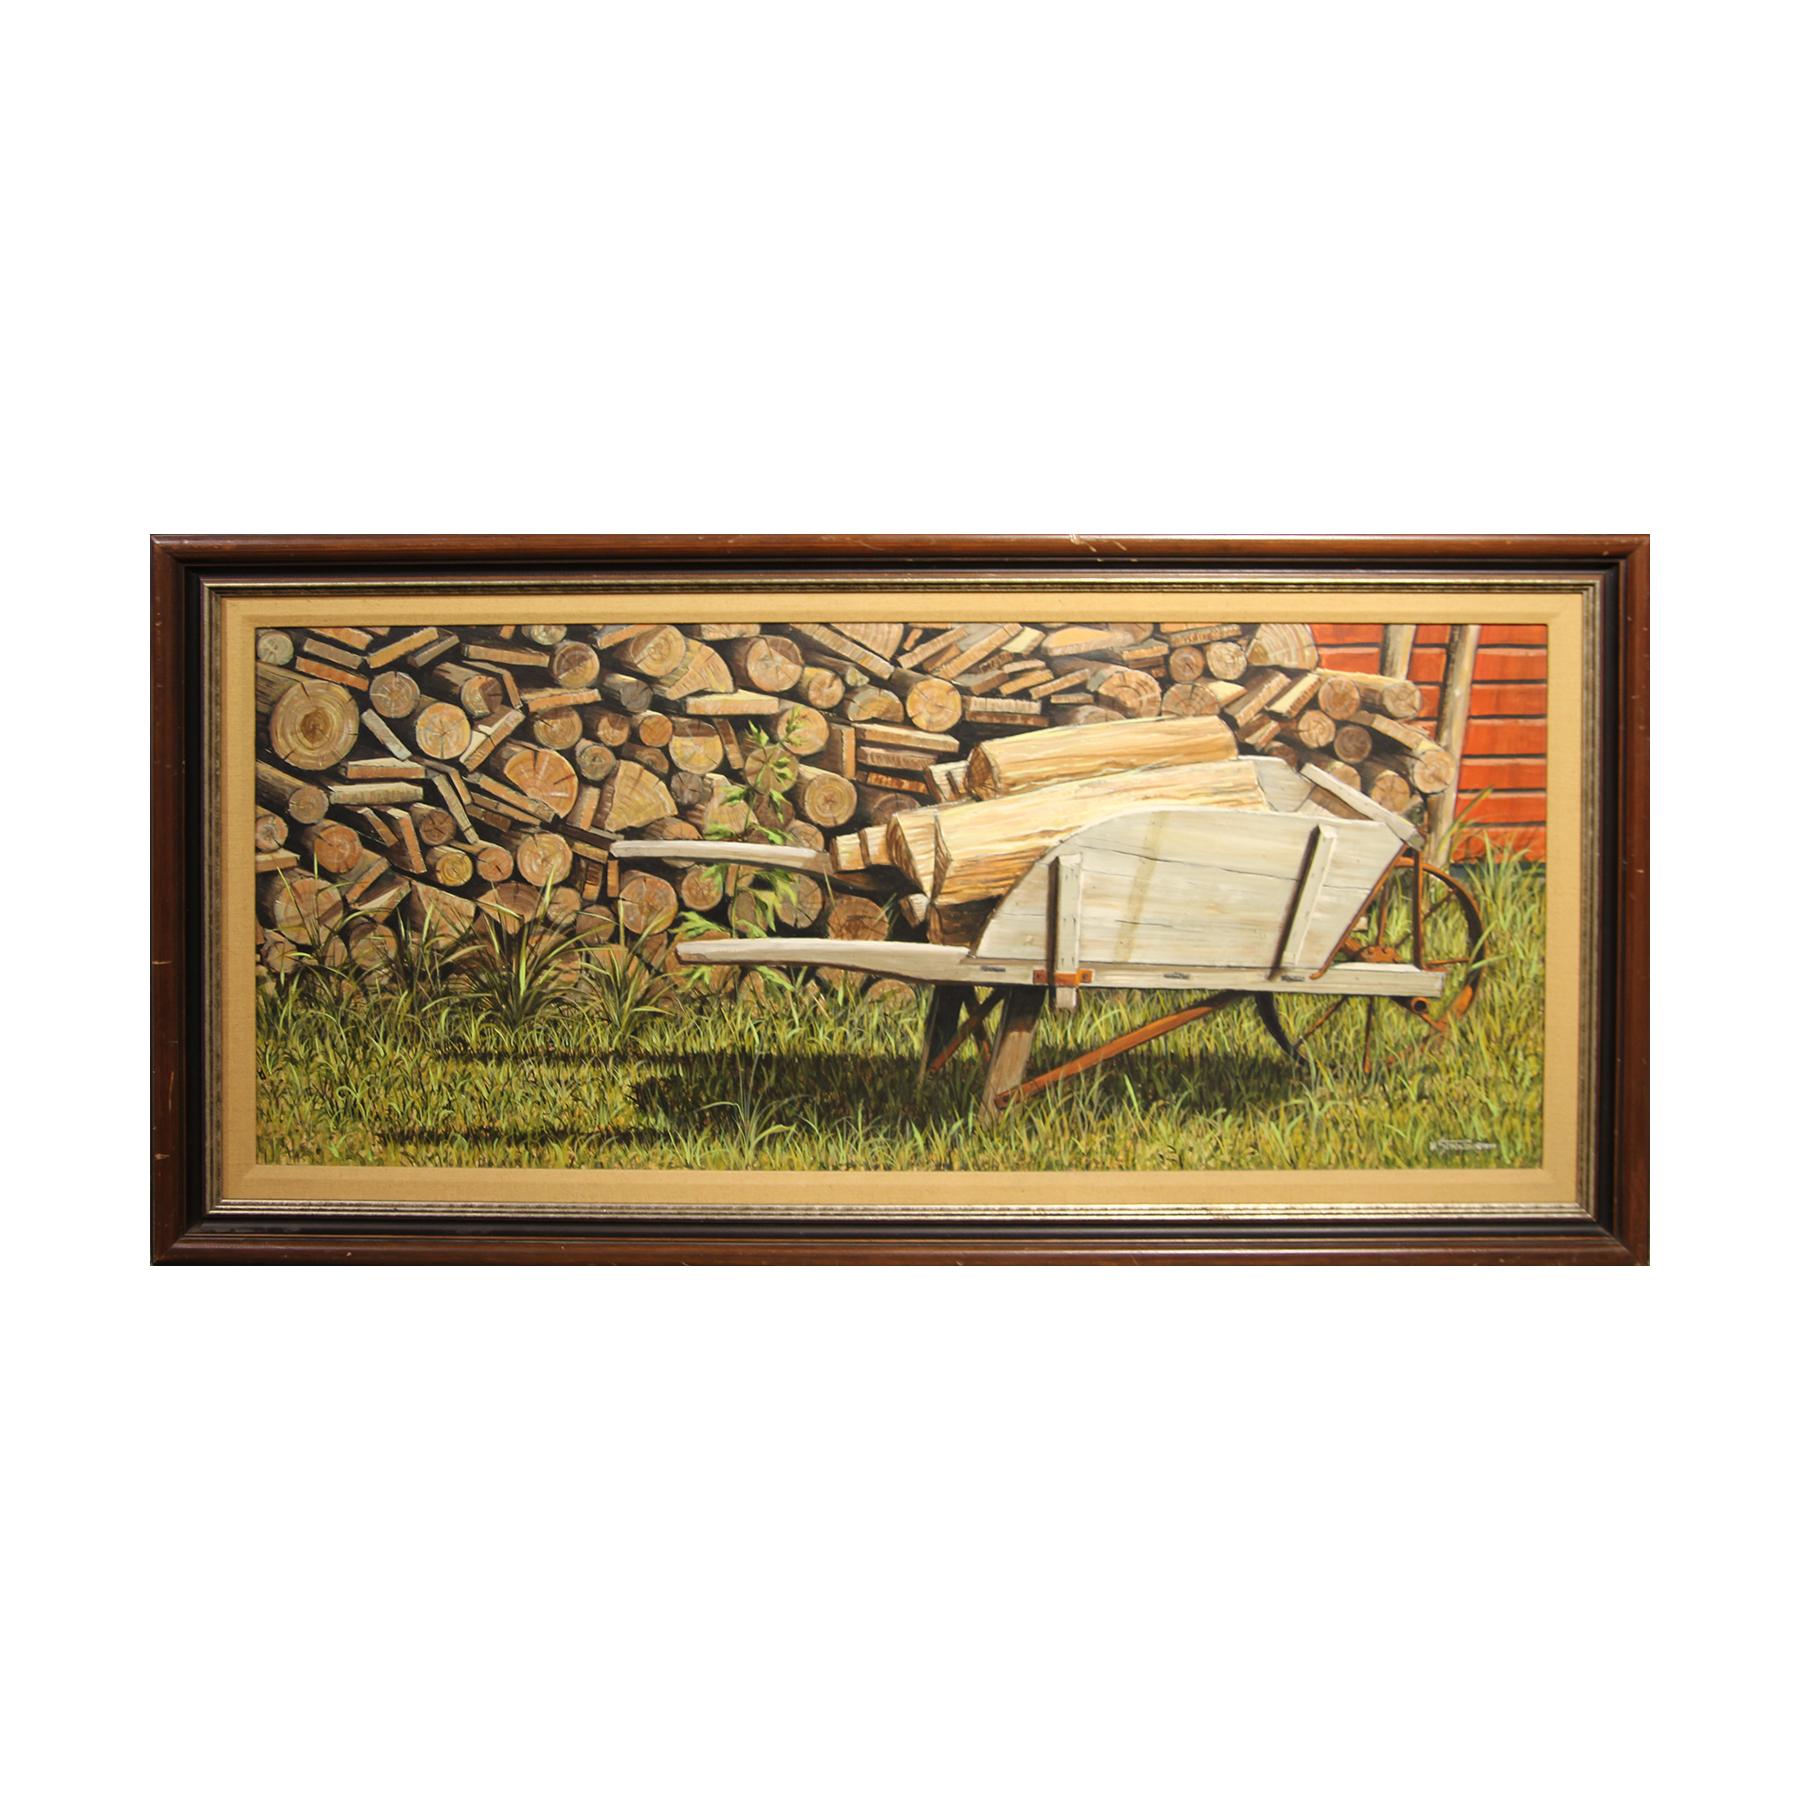 Naturalistic Wood and Wheel Barrow Pastoral Country Still Life Painting